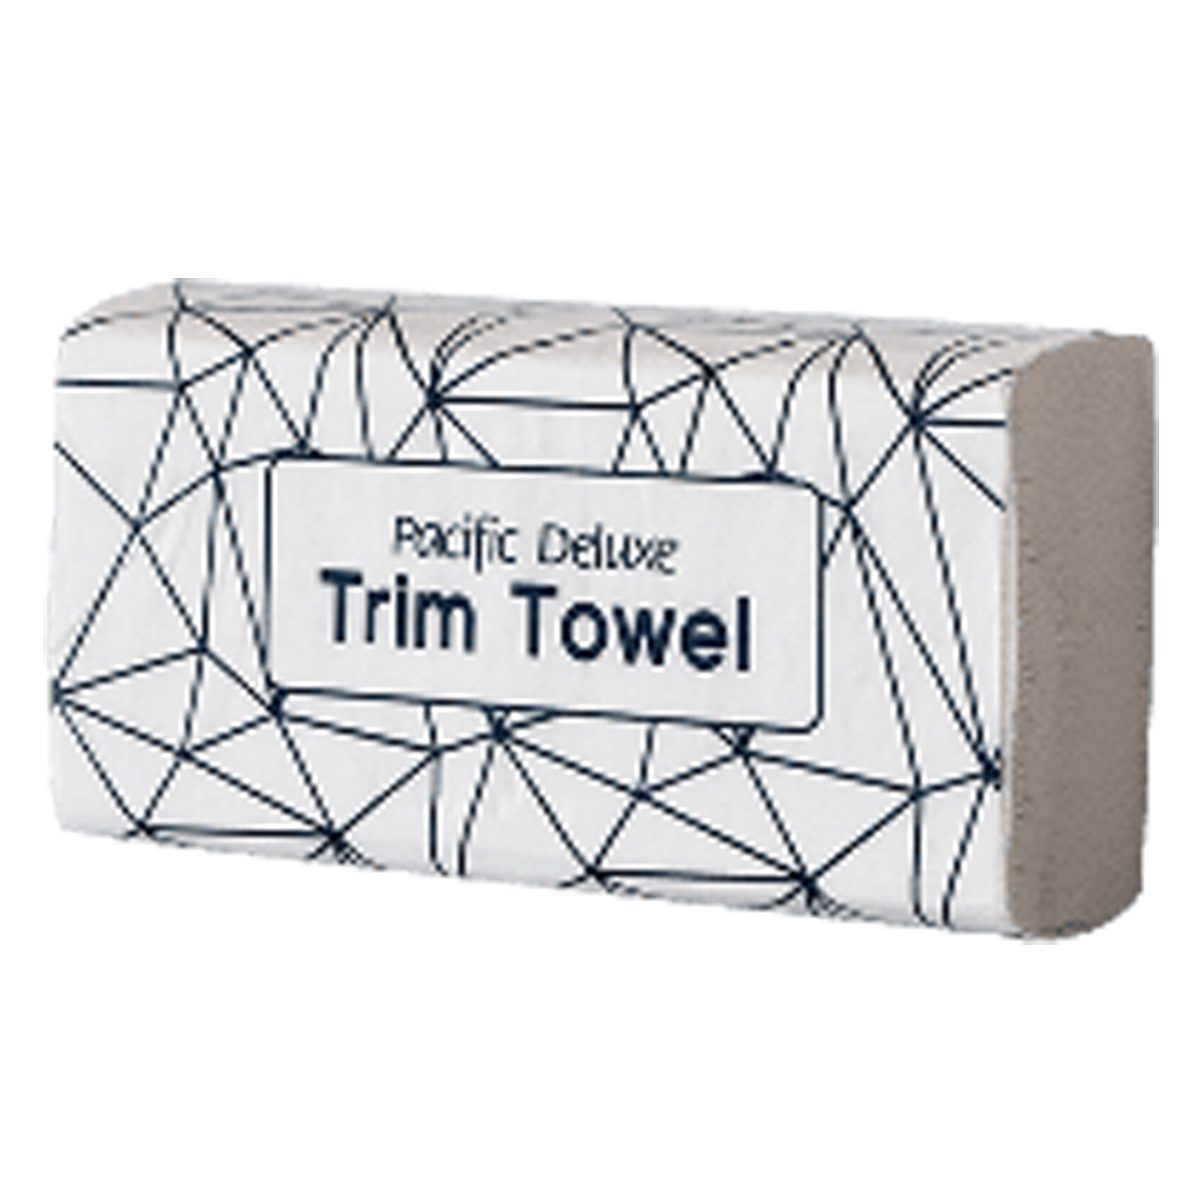 paper-products-paper-towels-deluxe-white-trim-paper-towels-2160-compact-superior-quality-interleaved-towel-single-sheet-dispensing-system-reduces-wastage-risk-contamination-vjs-distributors-PHTD200